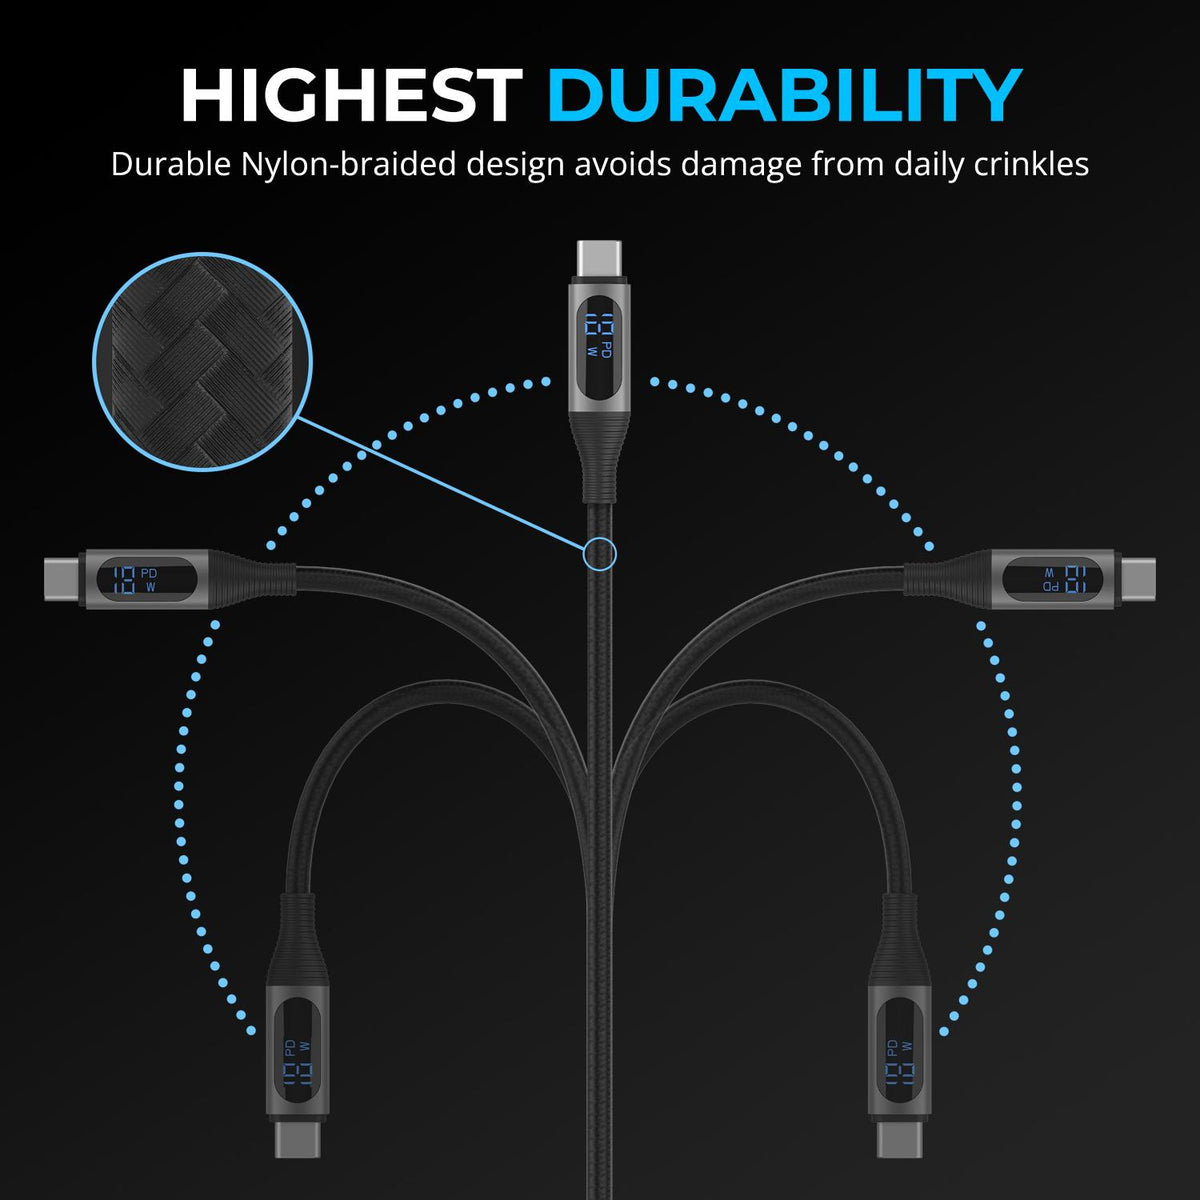 USB C to USB C Charging Cable with Smart Display